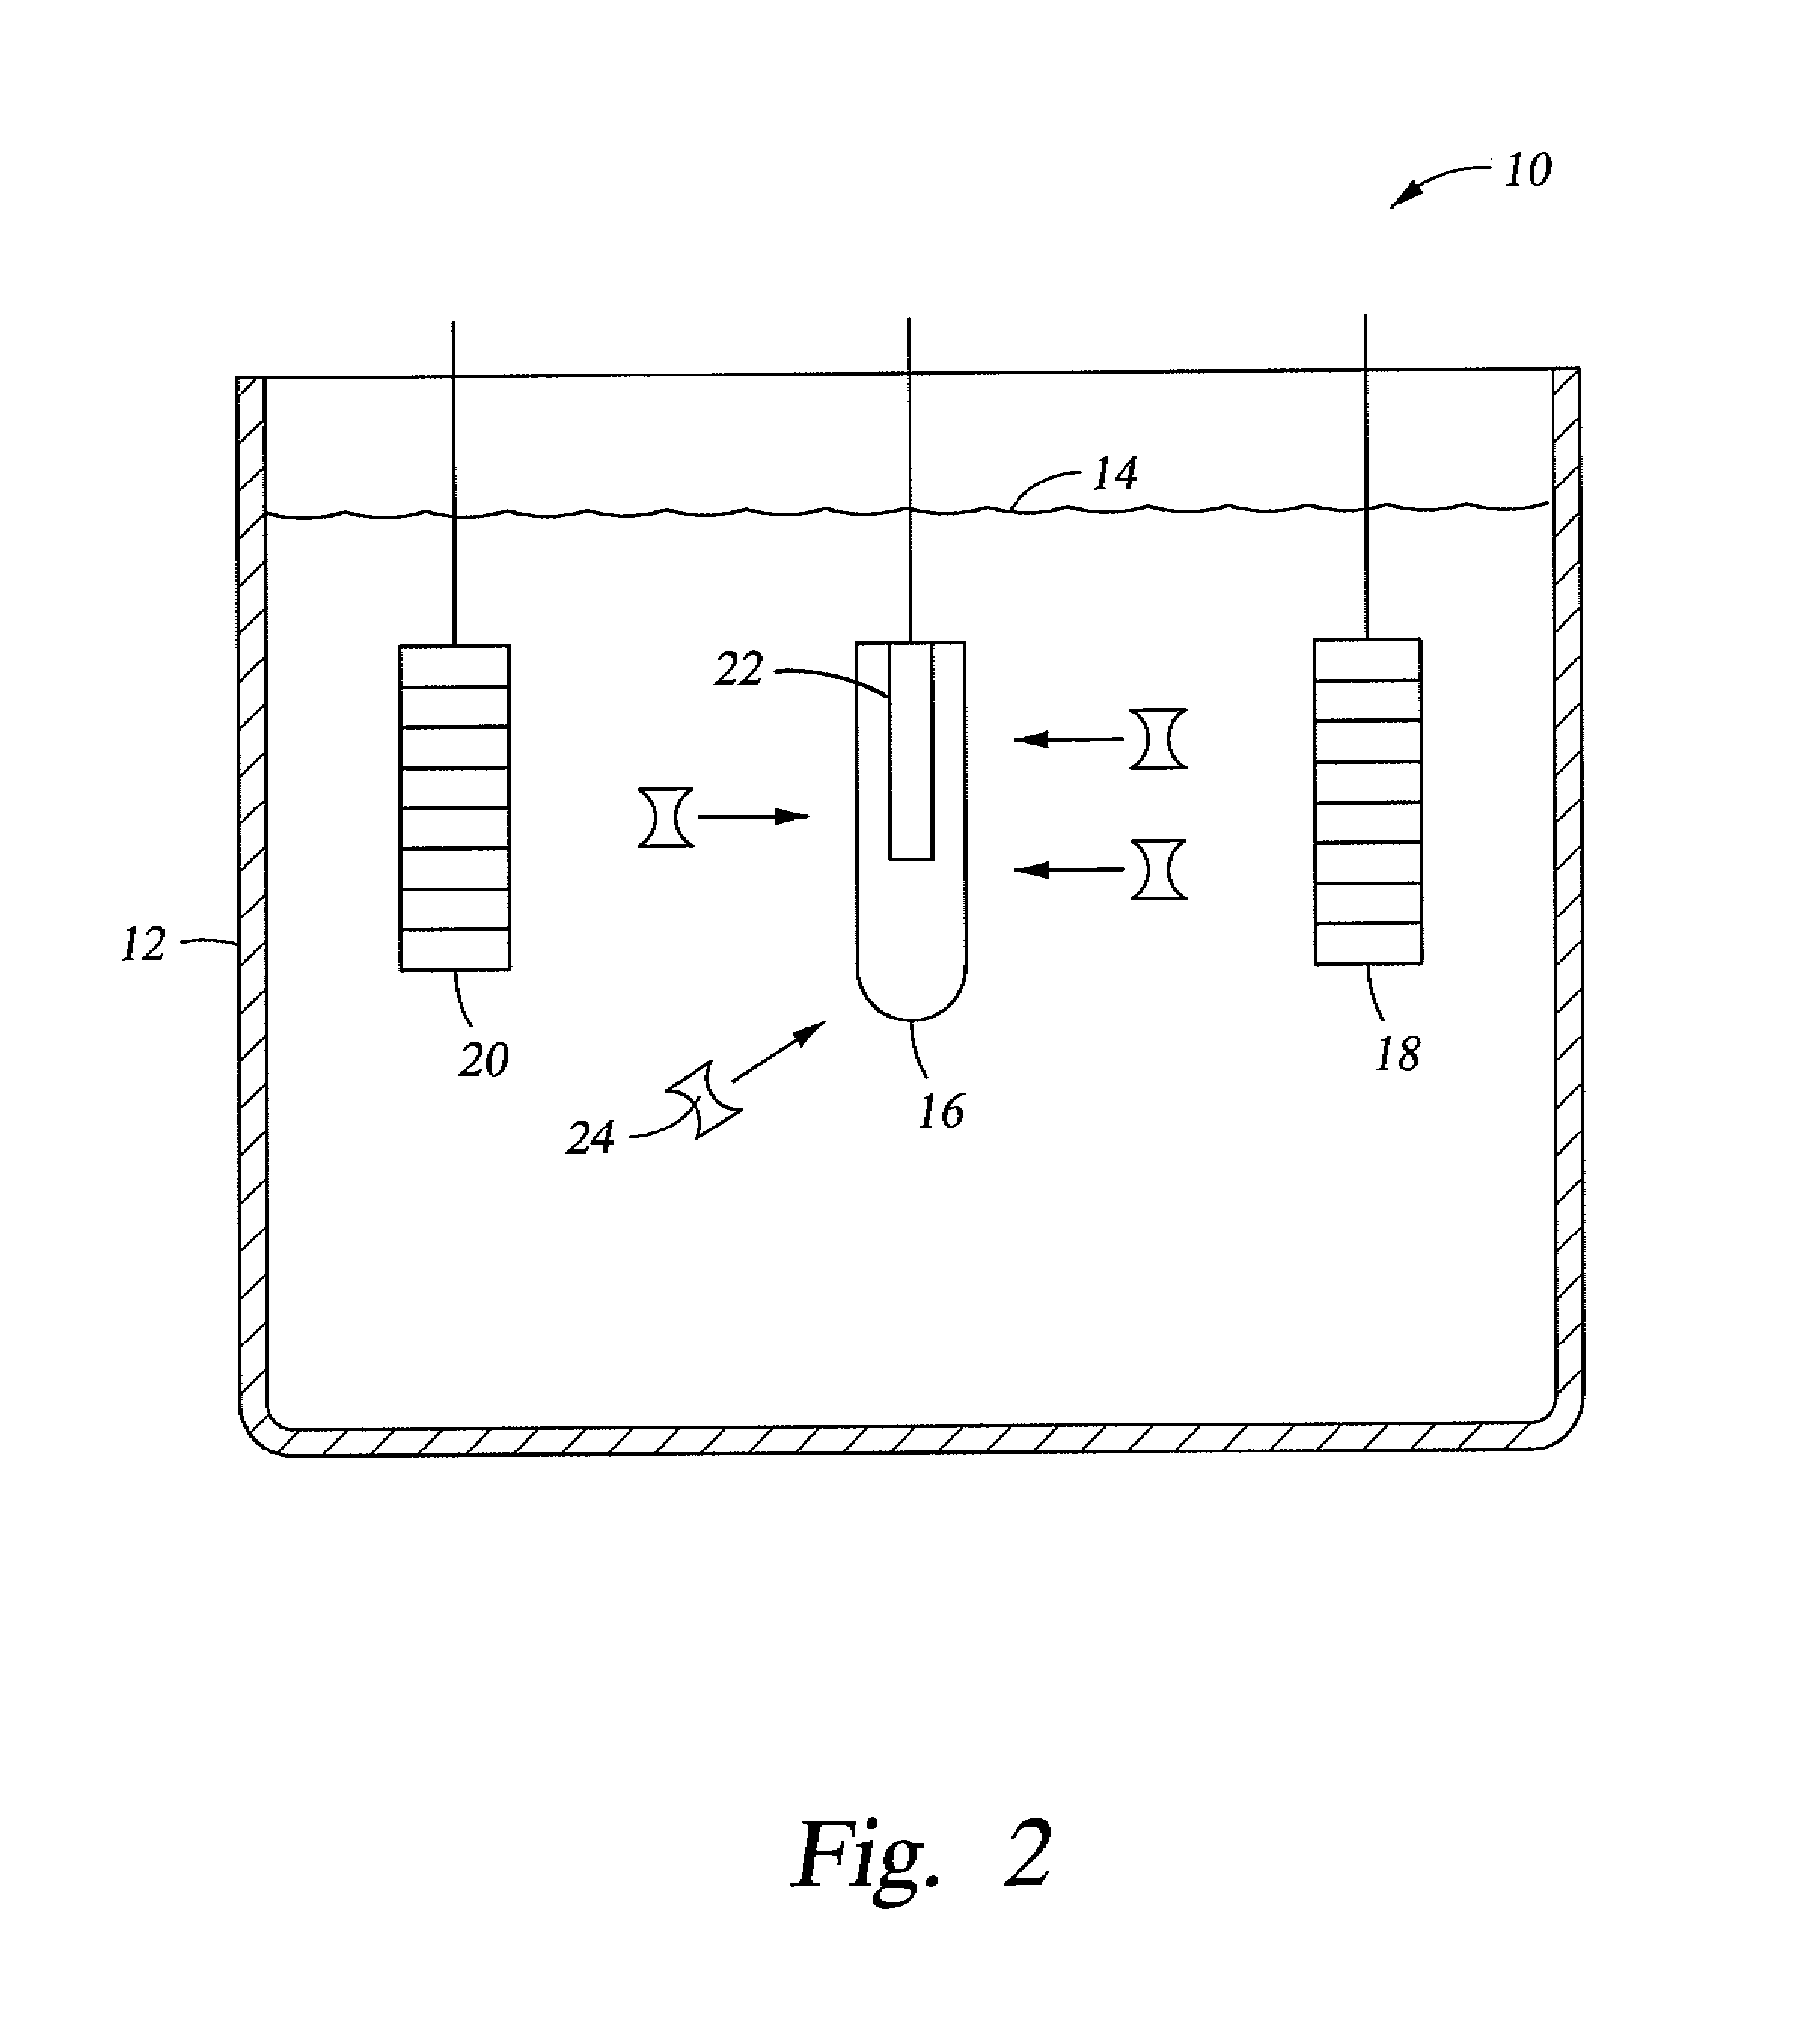 Stem cell enhanced protein products and uses therof